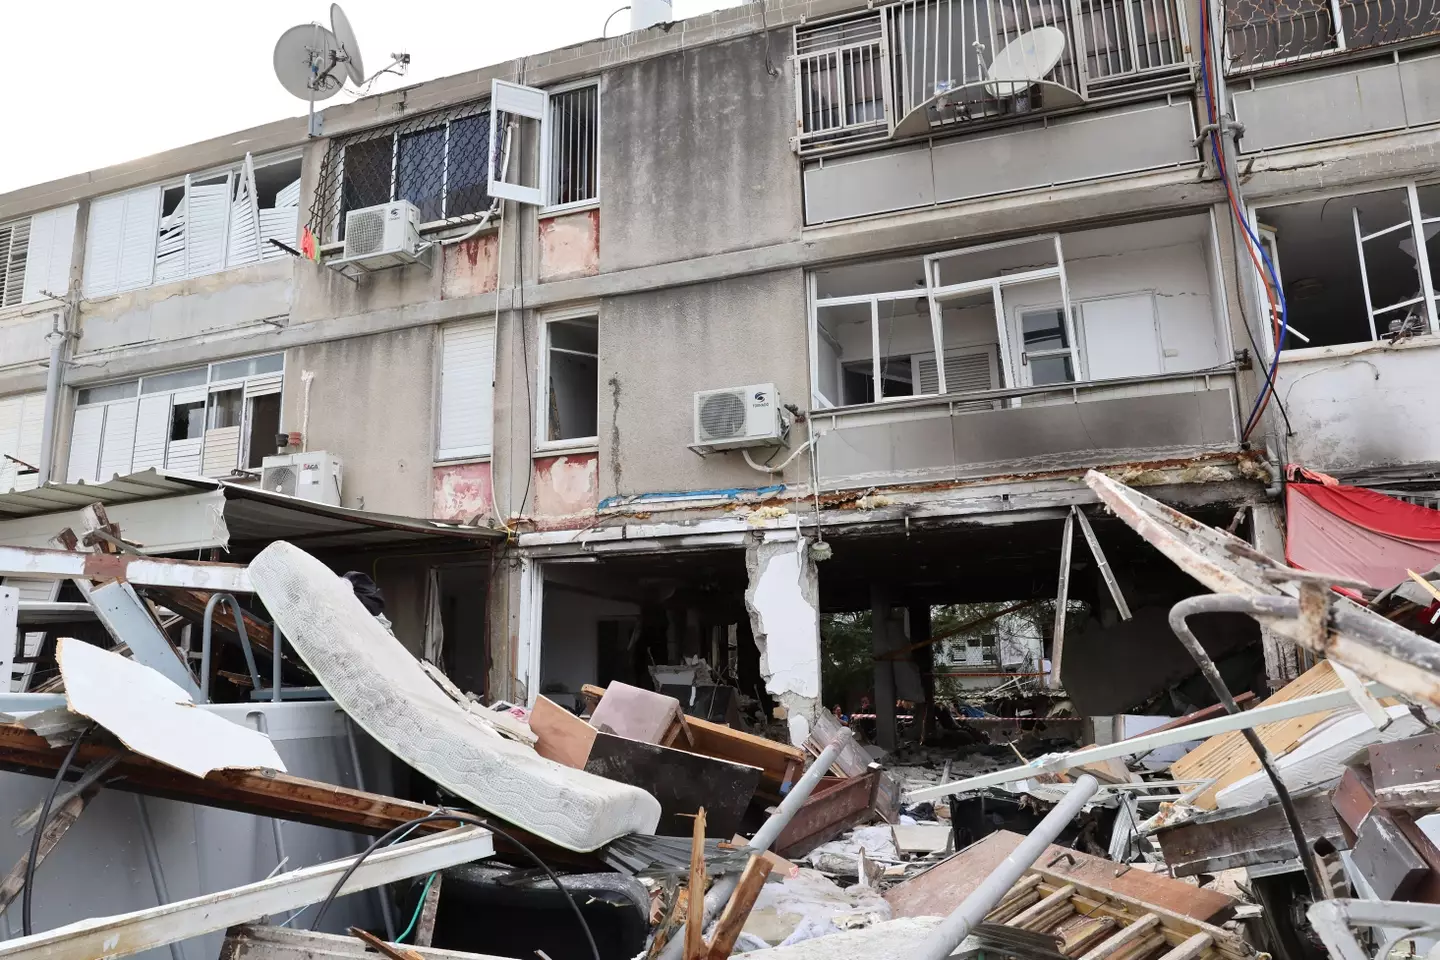 A view of the damage in the southern city of Ashkelon after a rocket hit.